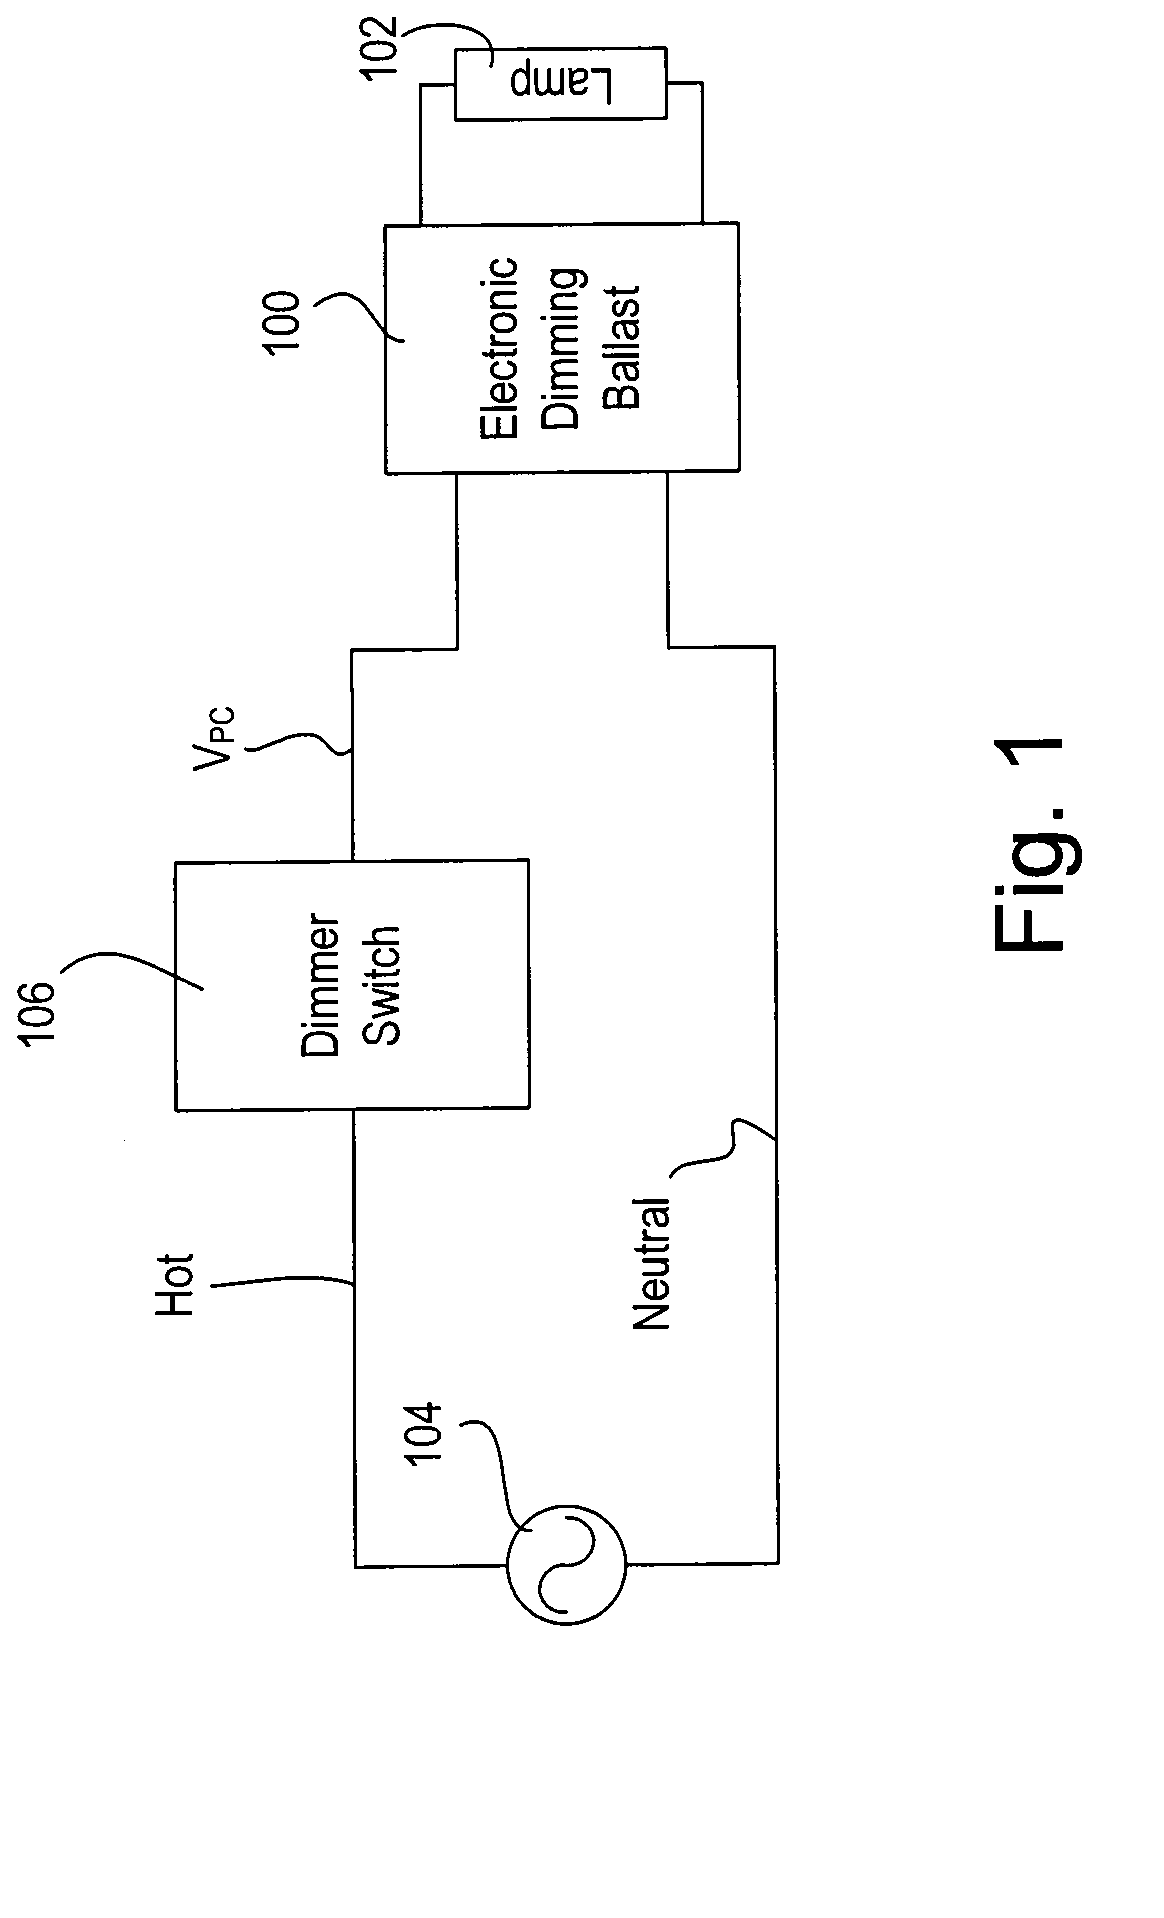 Measurement circuit for an electronic ballast